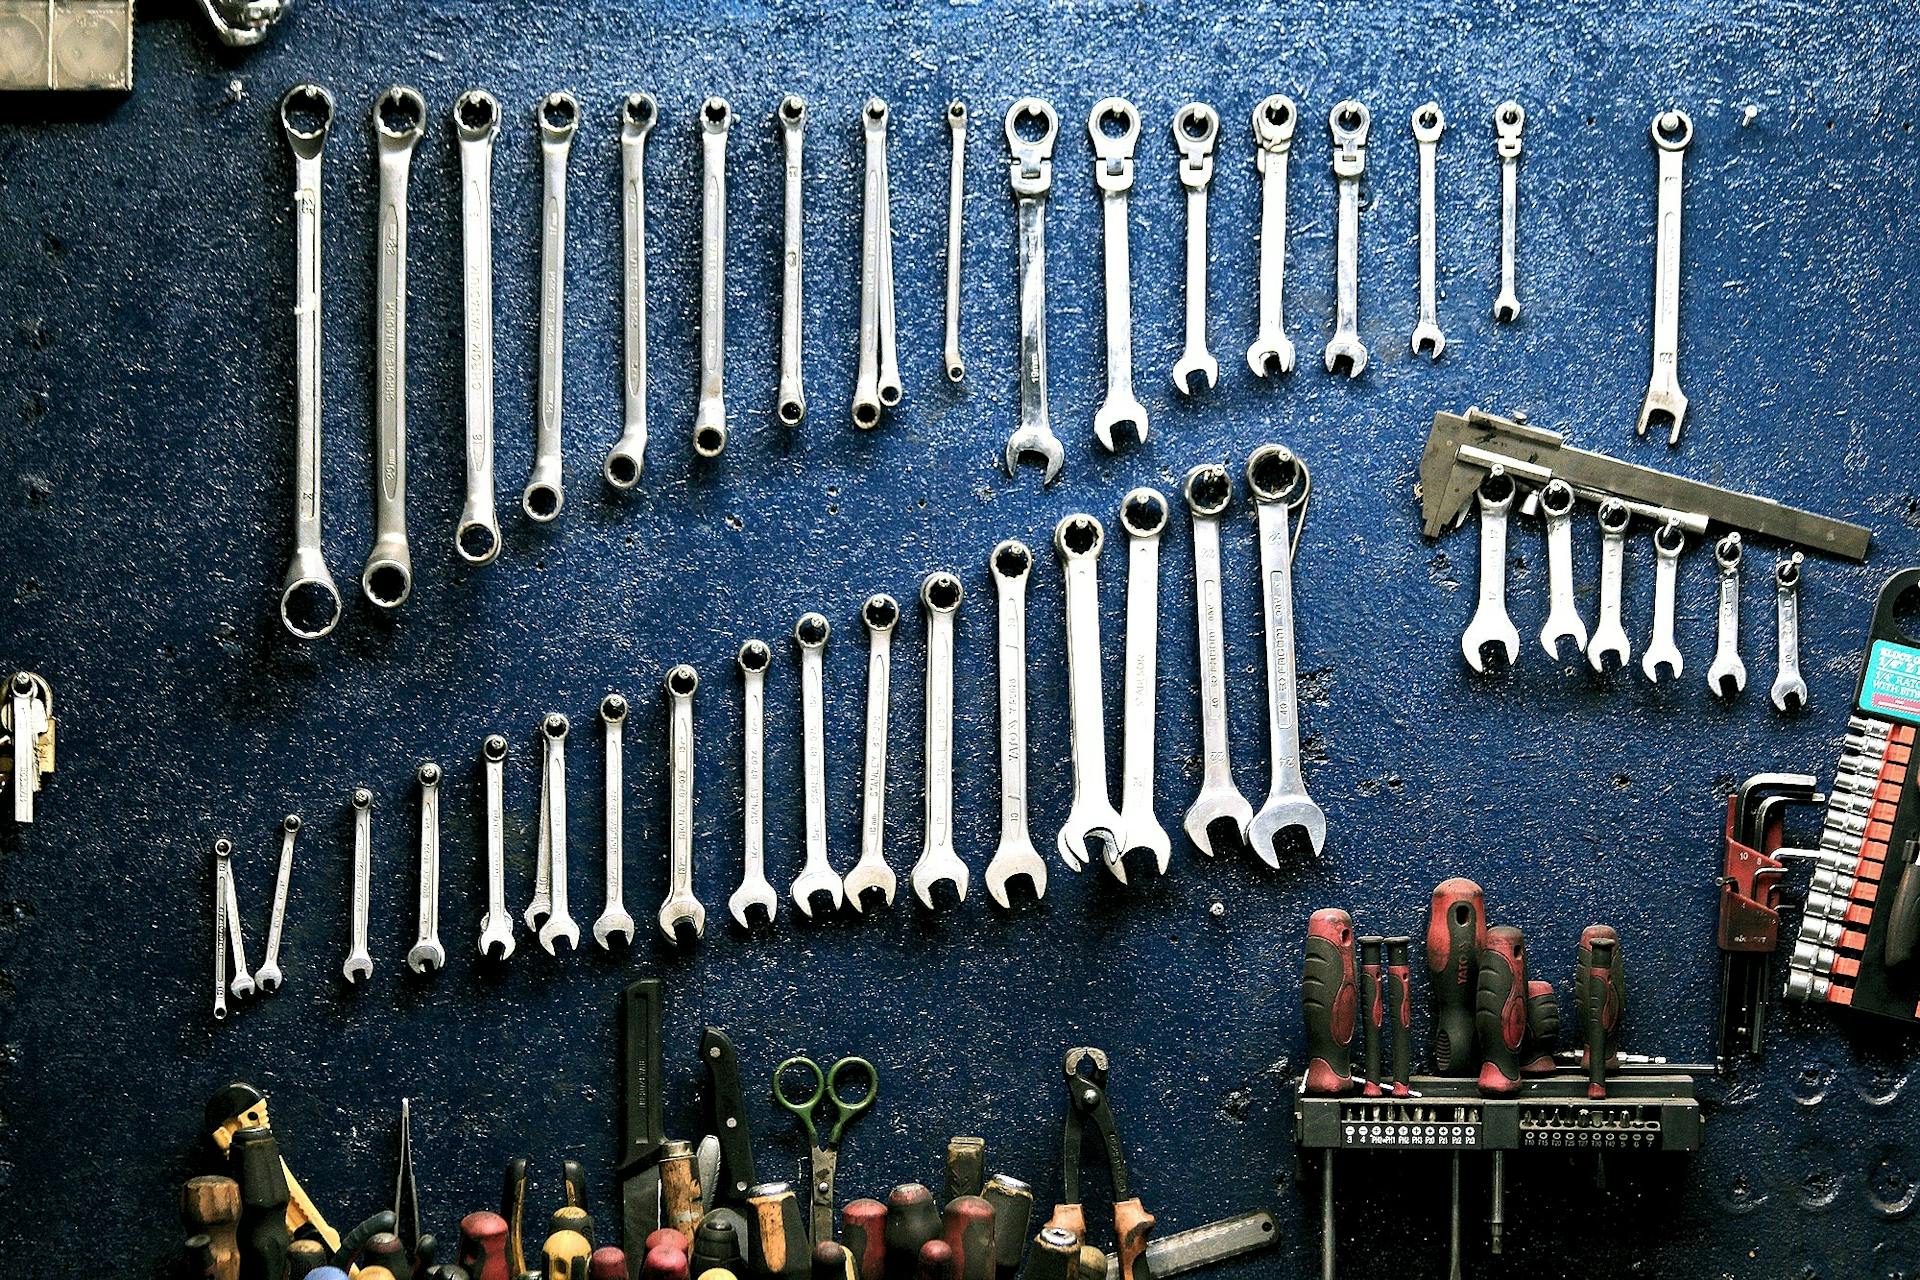 A wall of tools in a garage | Source: Pexels